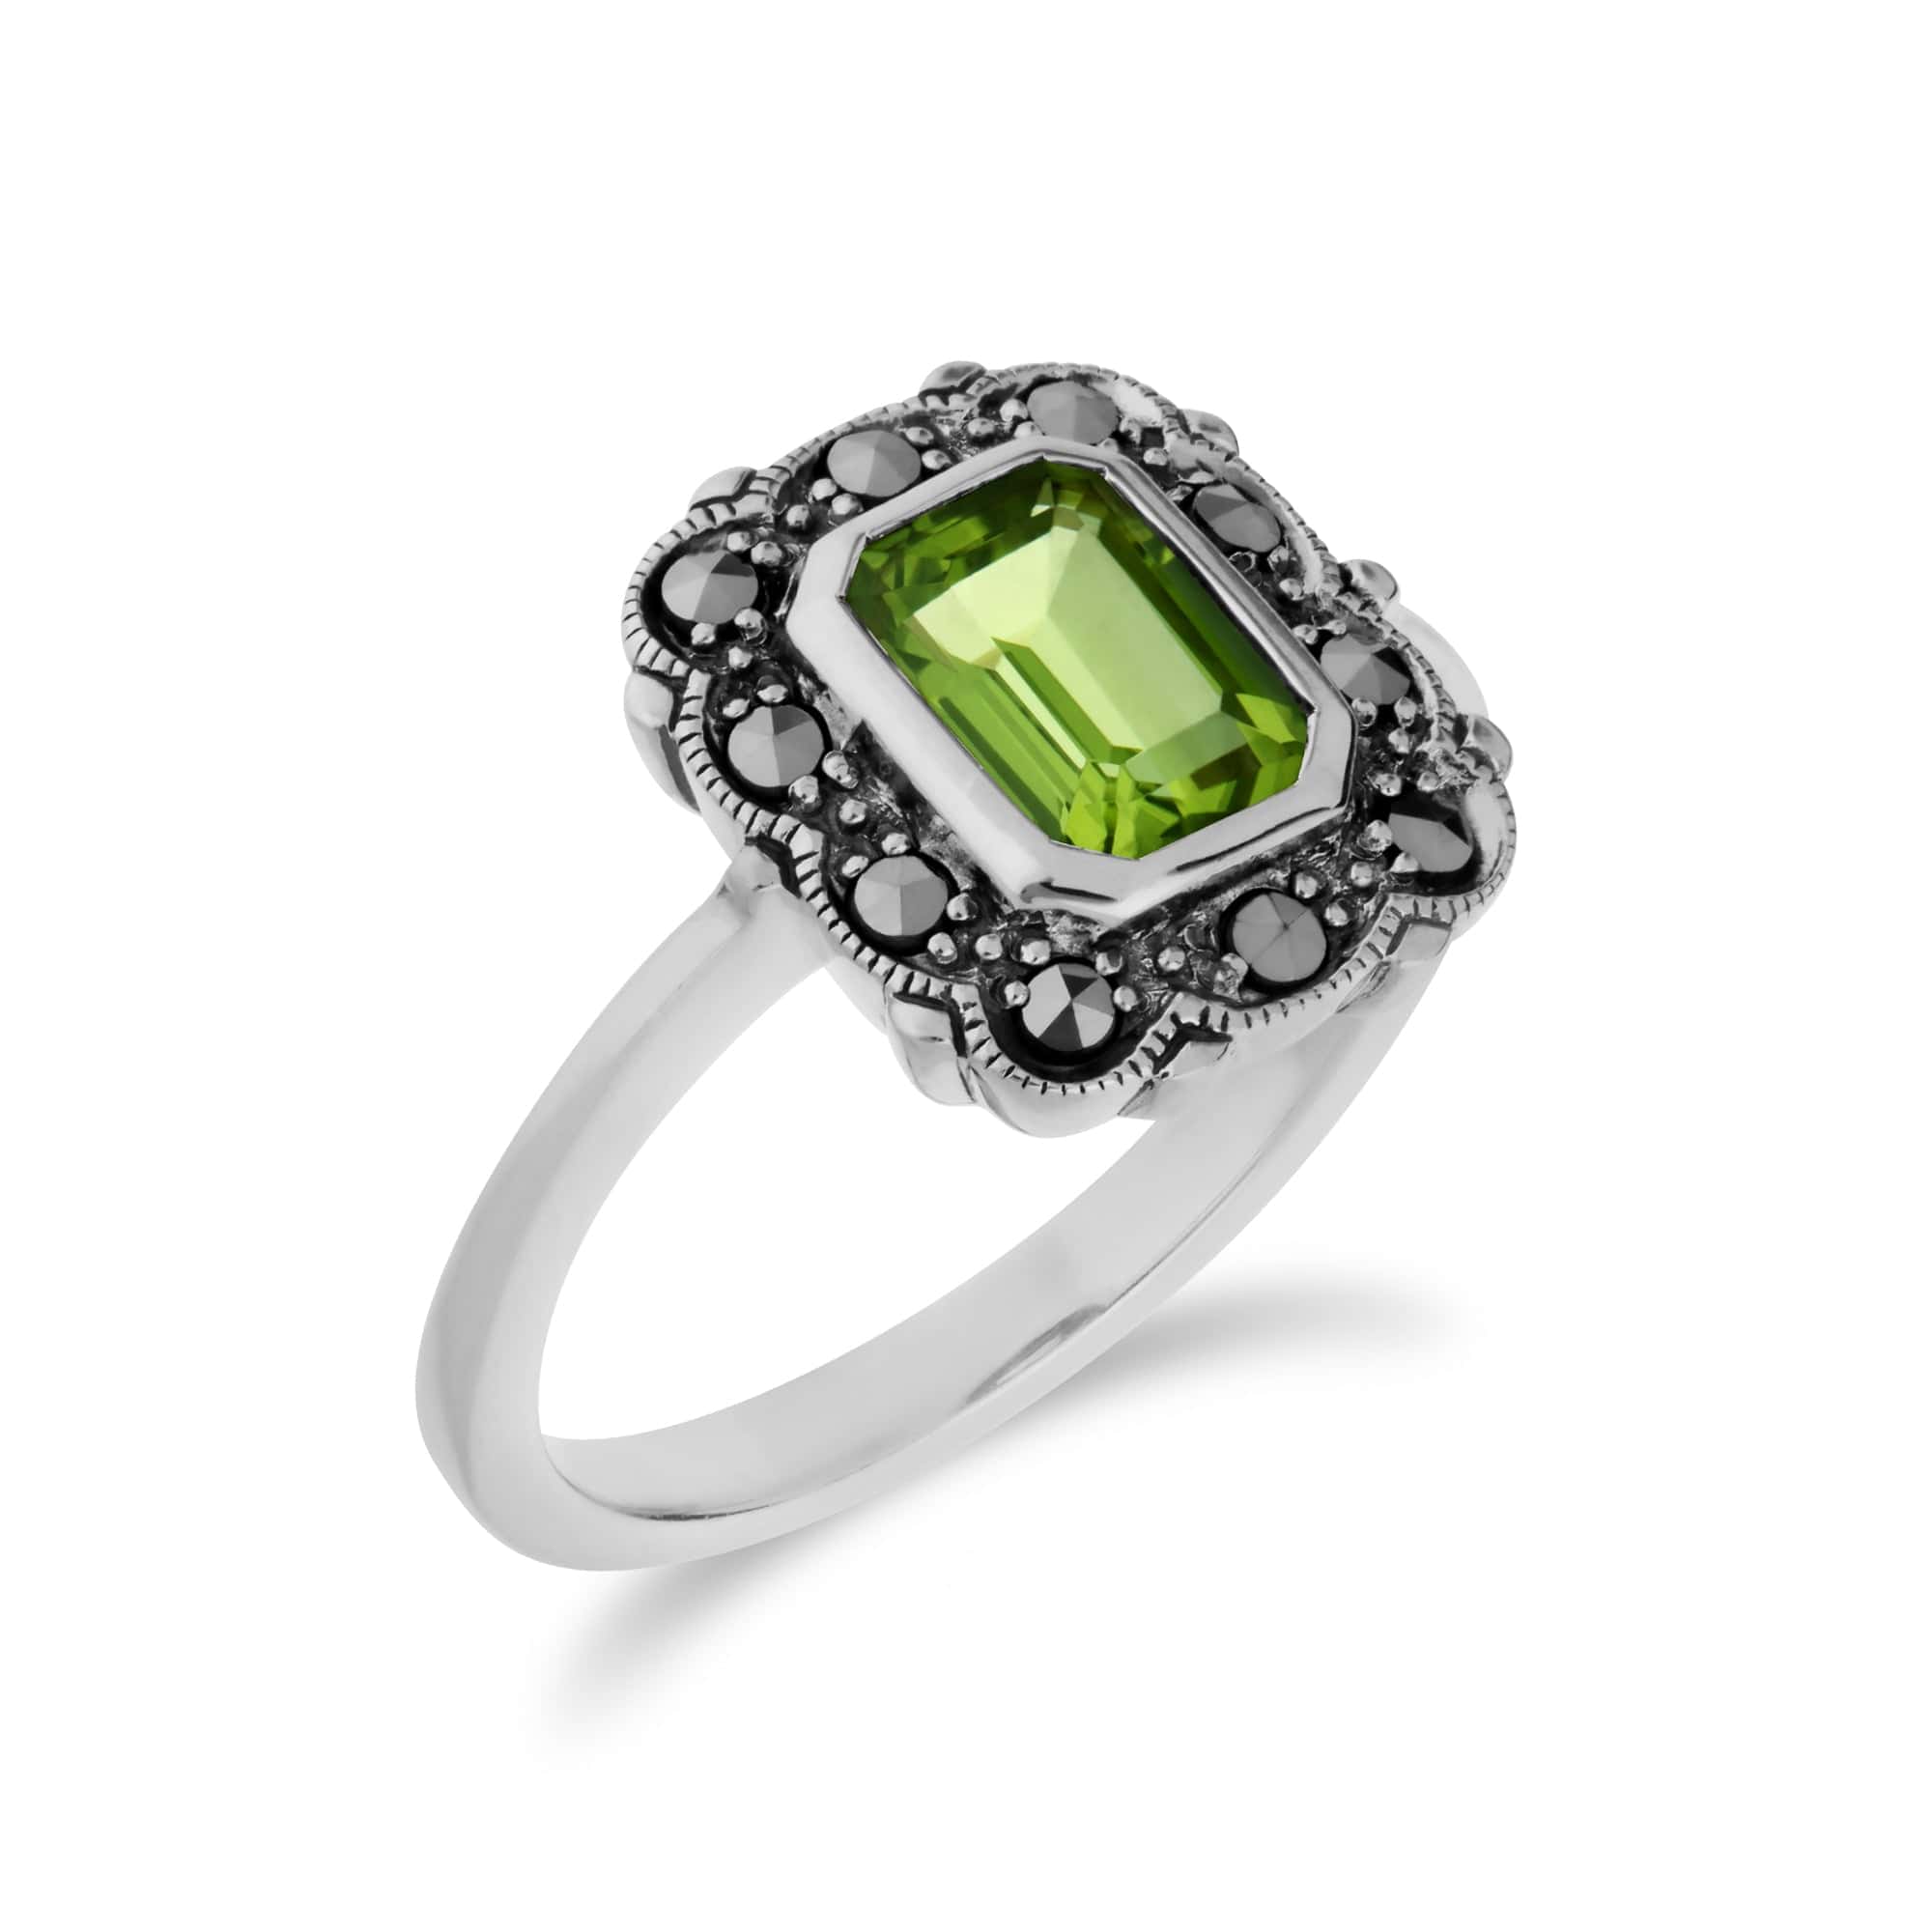 214R597106925 Art Nouveau Style Octagon Peridot & Marcasite Border Ring in 925 Sterling Silver 2